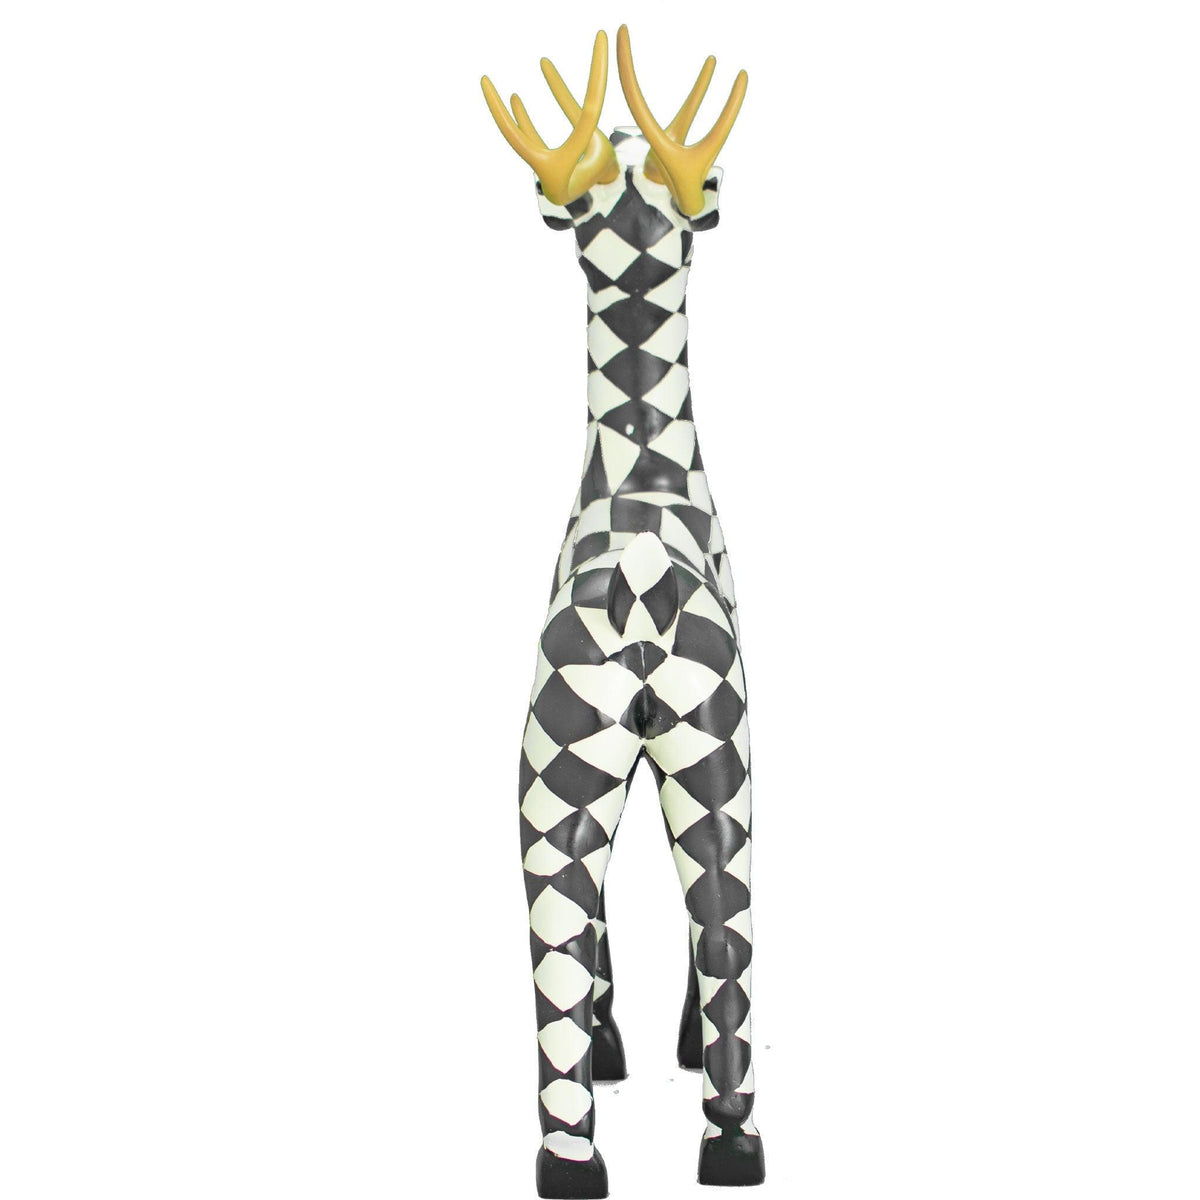 Lee Display's Brand New Black and White Checkered Standing Reindeer on Sale and Available for Rent at leedisplay.com